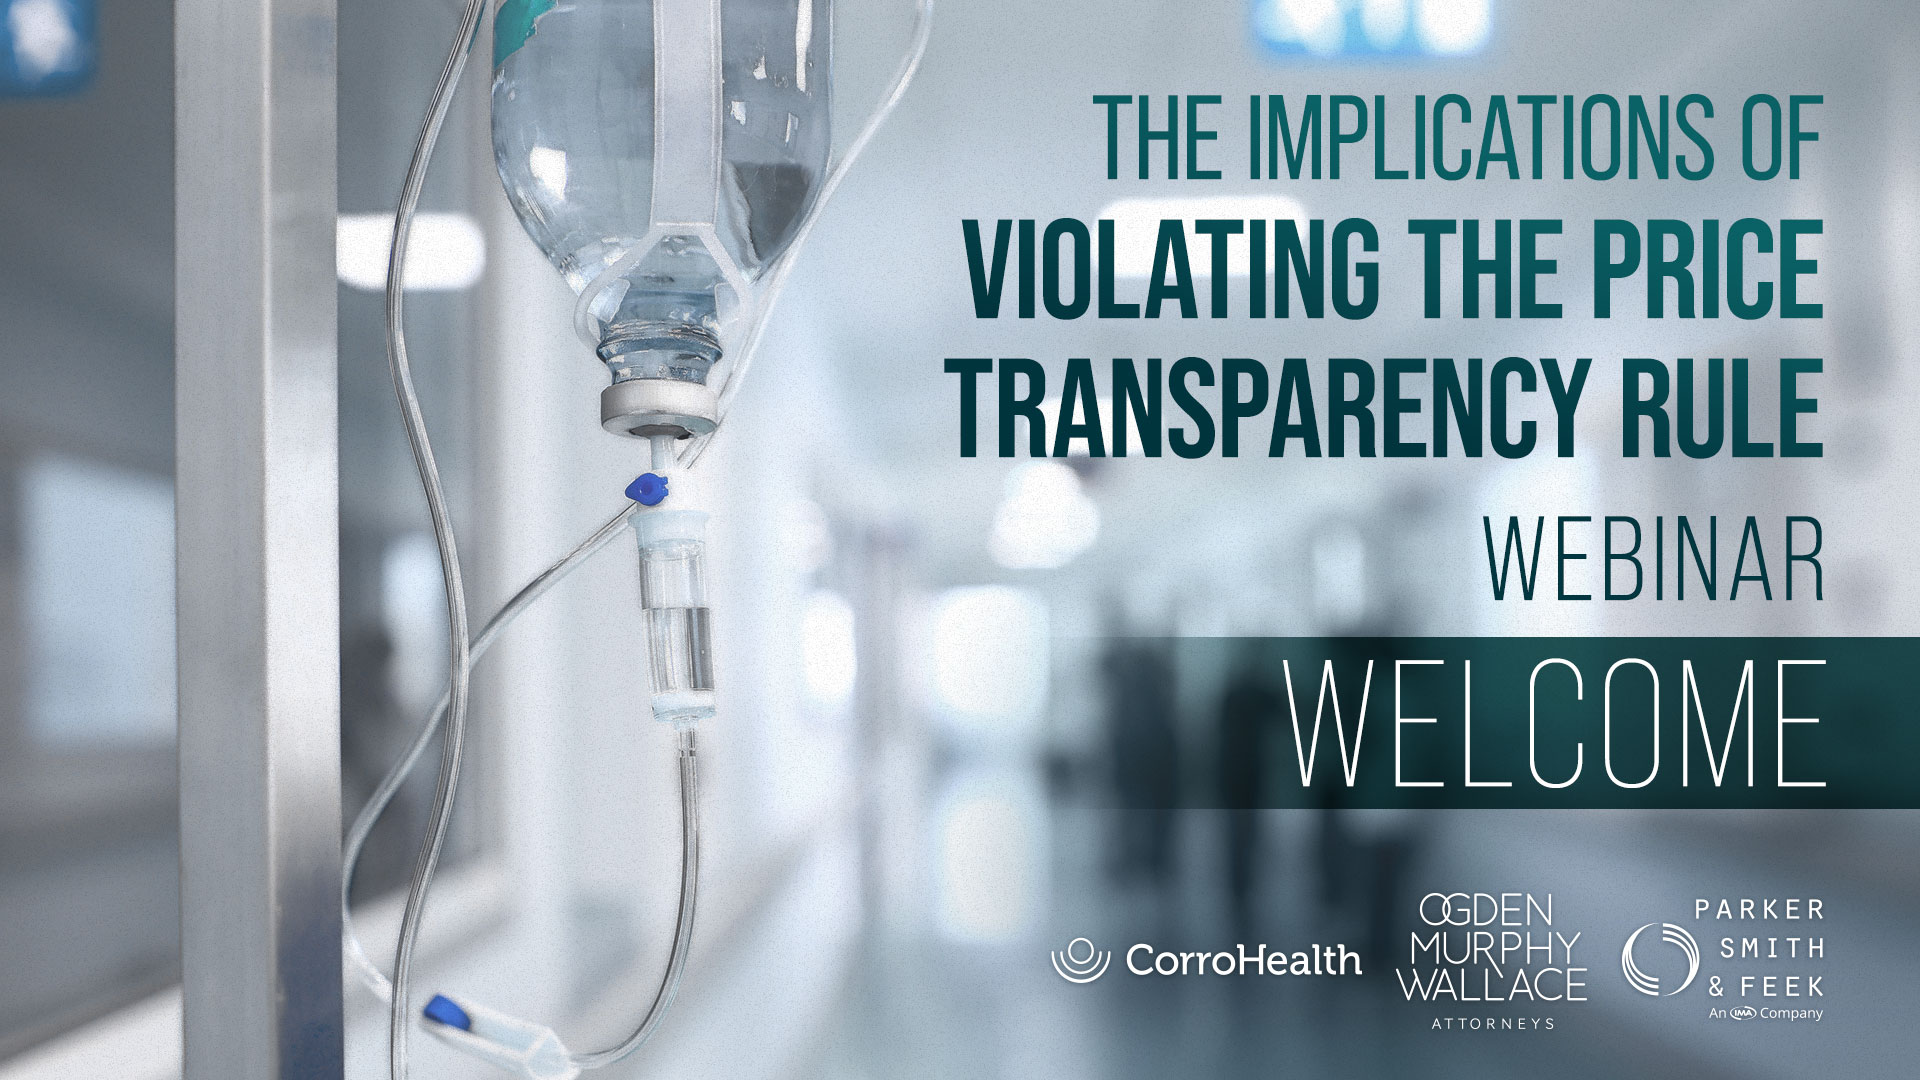 The Implications of Violating the Price Transparency Rule Webinar